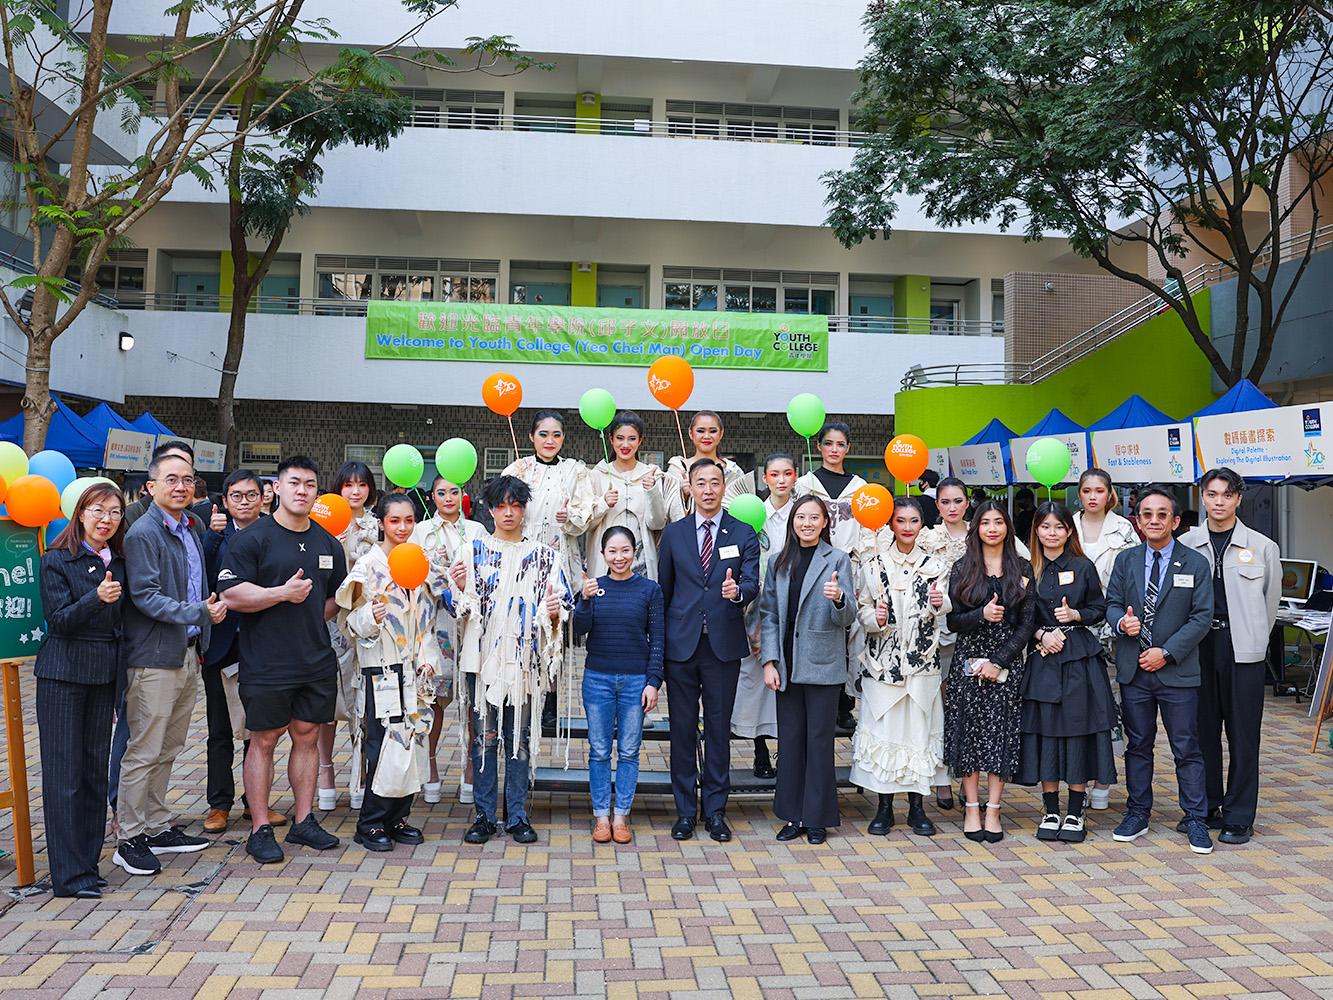 Ms MA King-fan, Kathy, JP, District Officer (Sai Kung) visited the Open Day of Youth College (Yeo Chei Man)